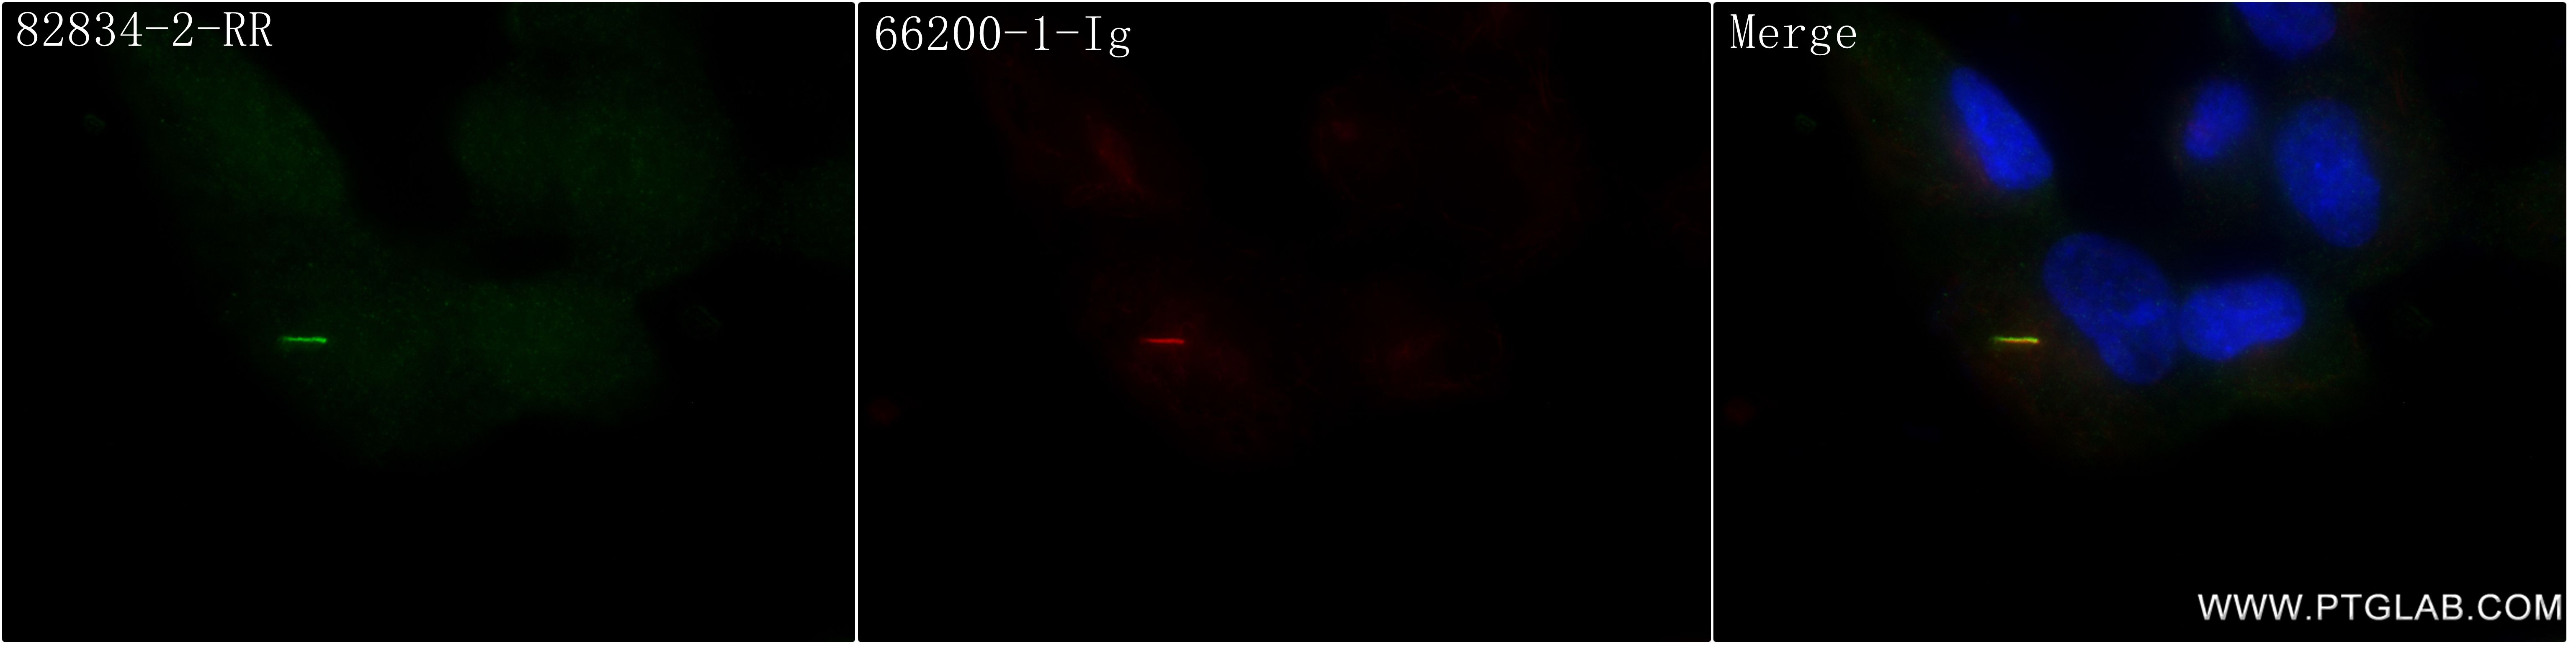 IF Staining of hTERT-RPE1 using 82834-2-RR (same clone as 82834-2-PBS)